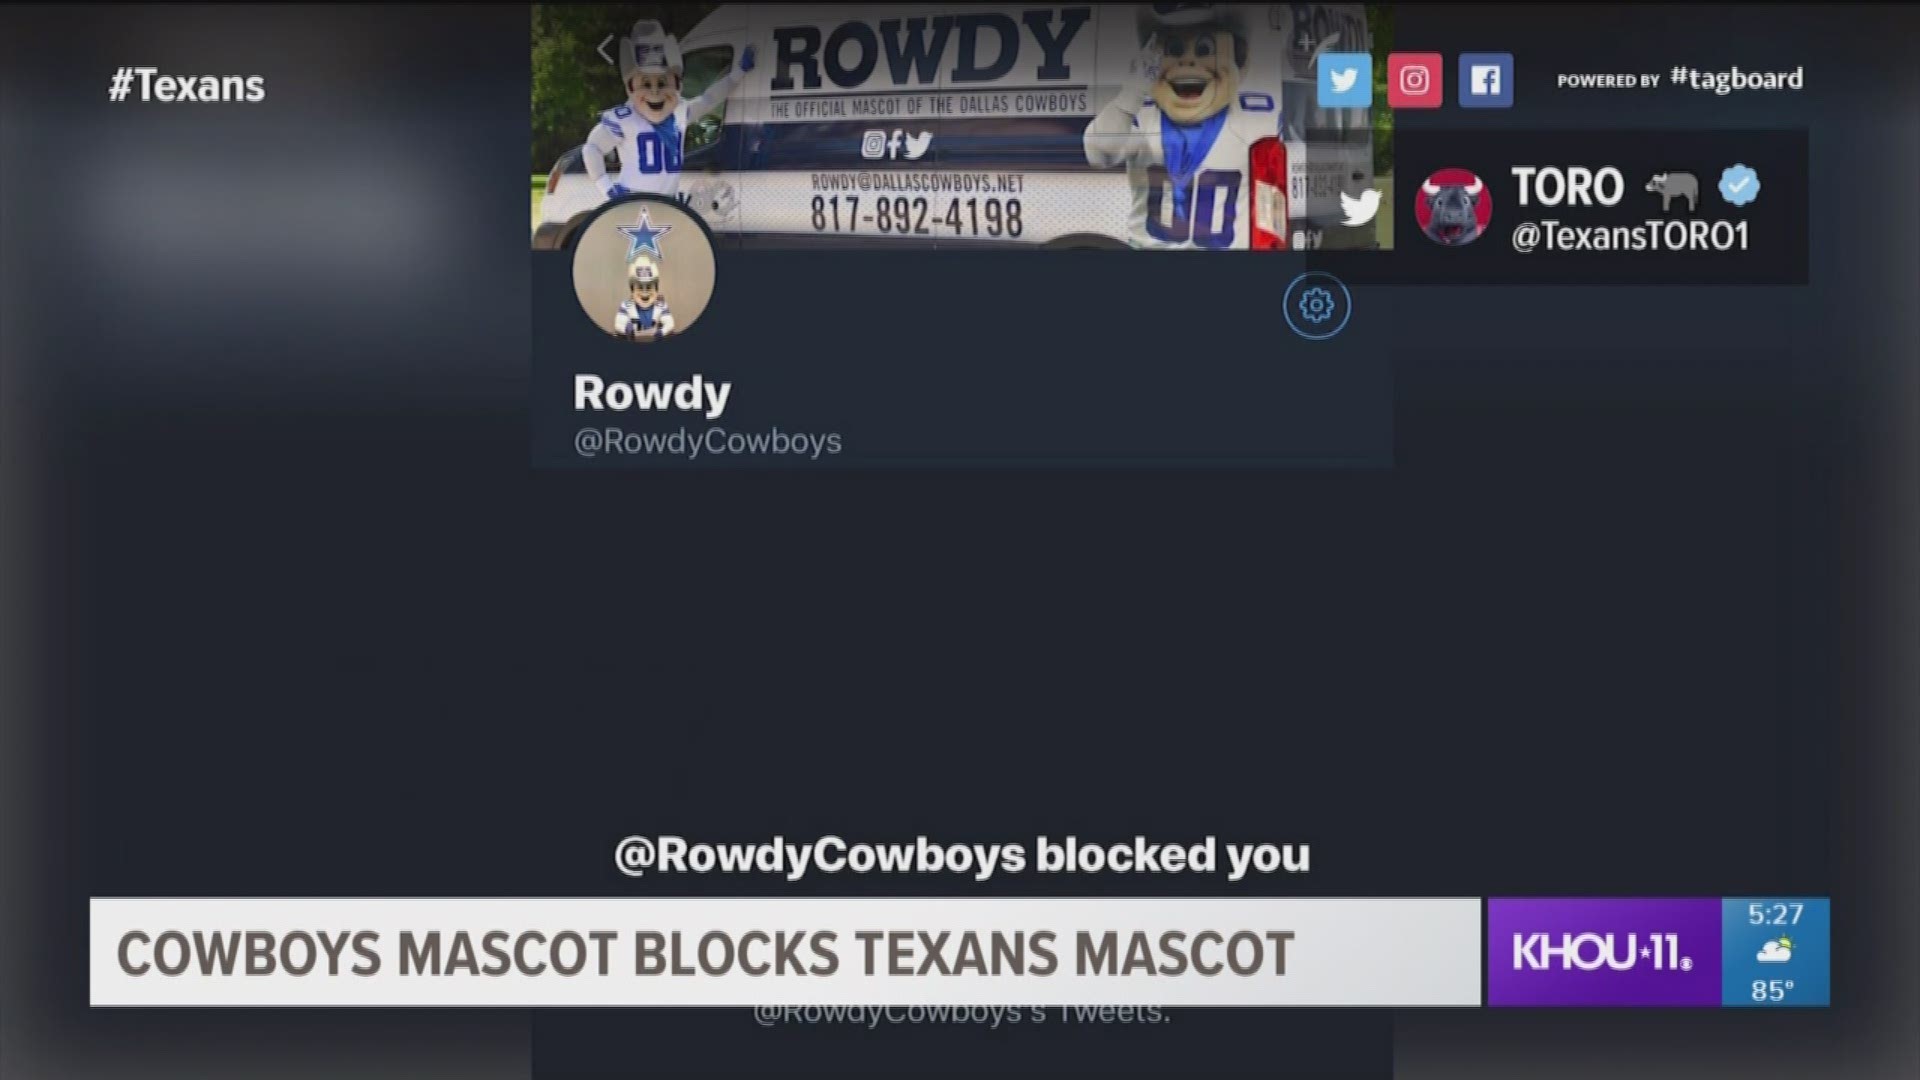 Texans mascot Toro tried to check on rival Cowboys mascot Rowdy but he can't. He's blocked on Twitter. And Rowdy's Twitter account has been silent since the Texans brought the Cowboys down in overtime Sunday night.